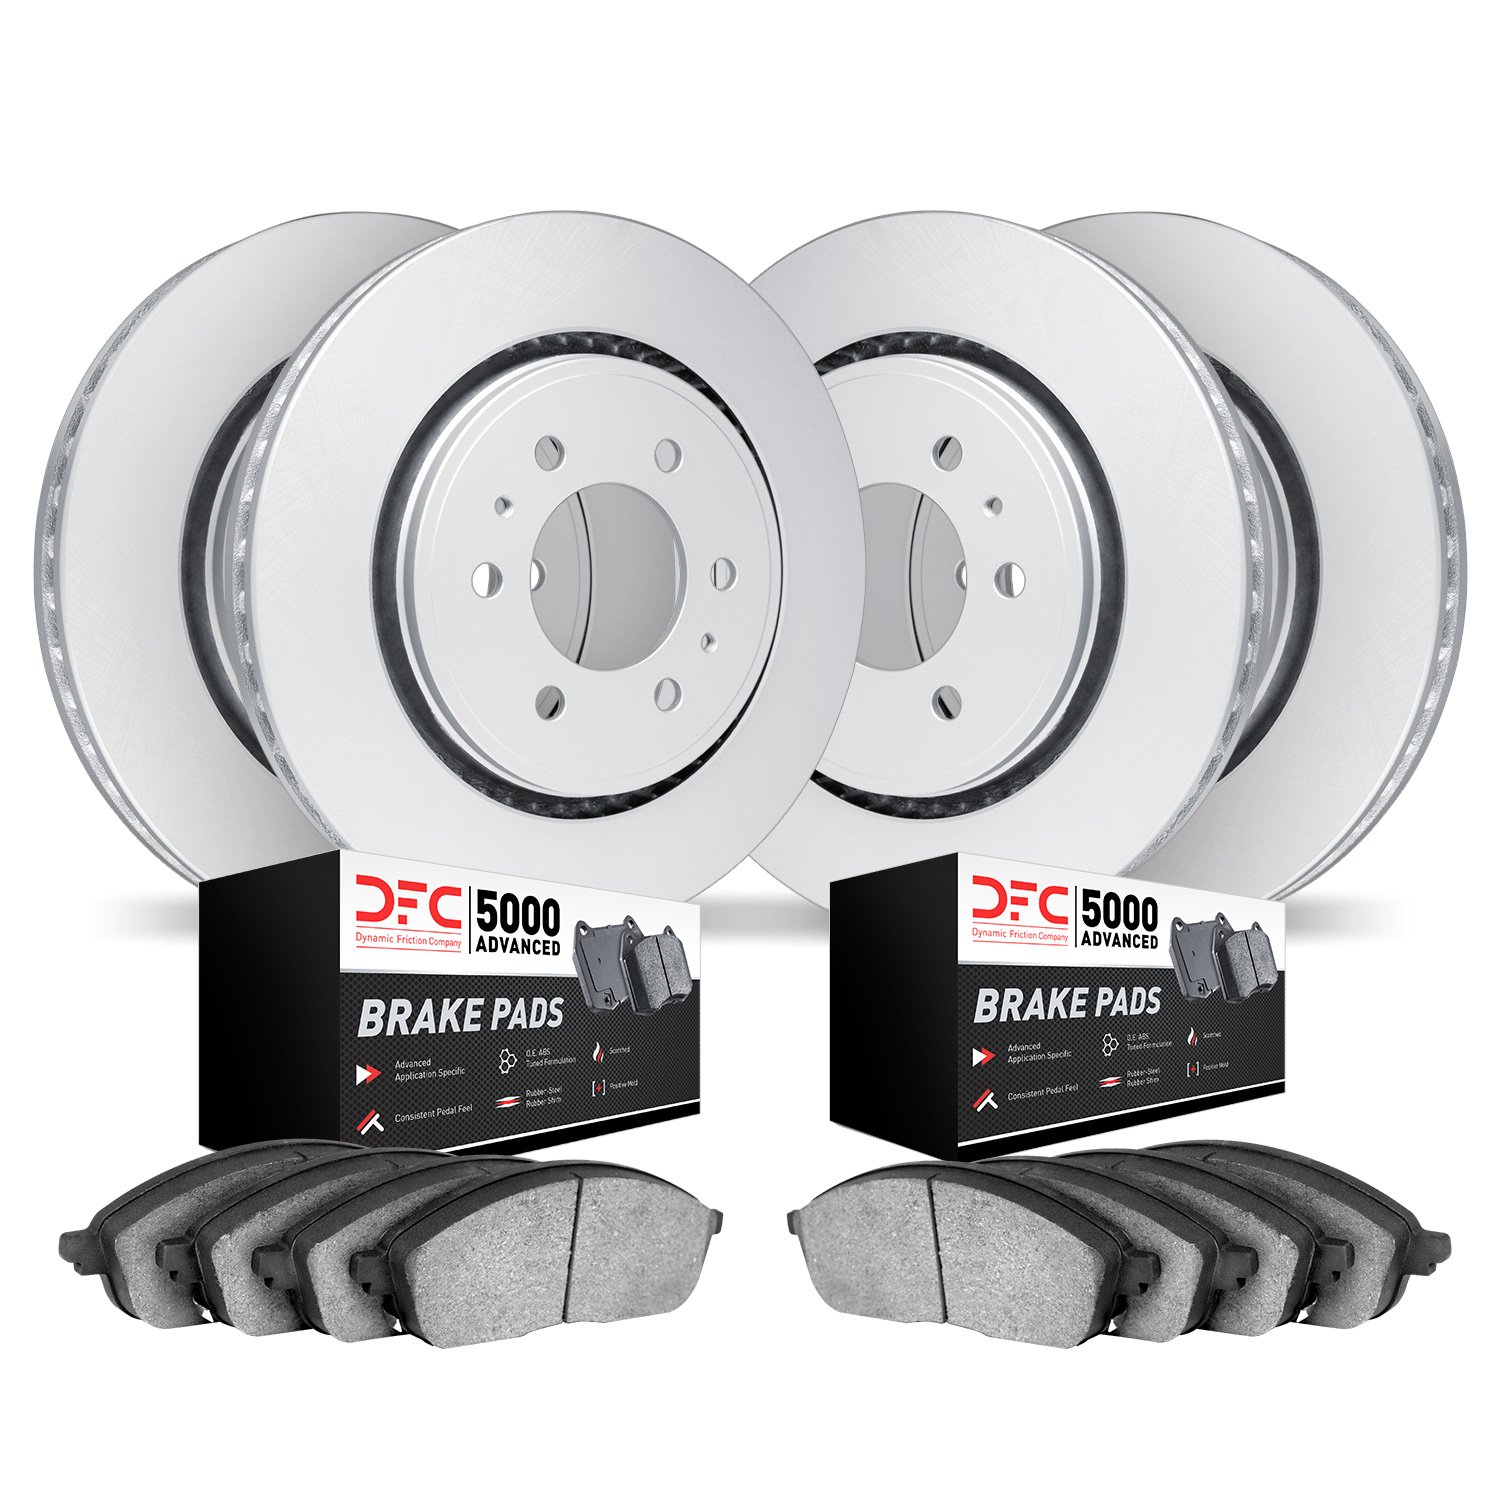 4504-54095 Geospec Brake Rotors w/5000 Advanced Brake Pads Kit, 2010-2012 Ford/Lincoln/Mercury/Mazda, Position: Front and Rear